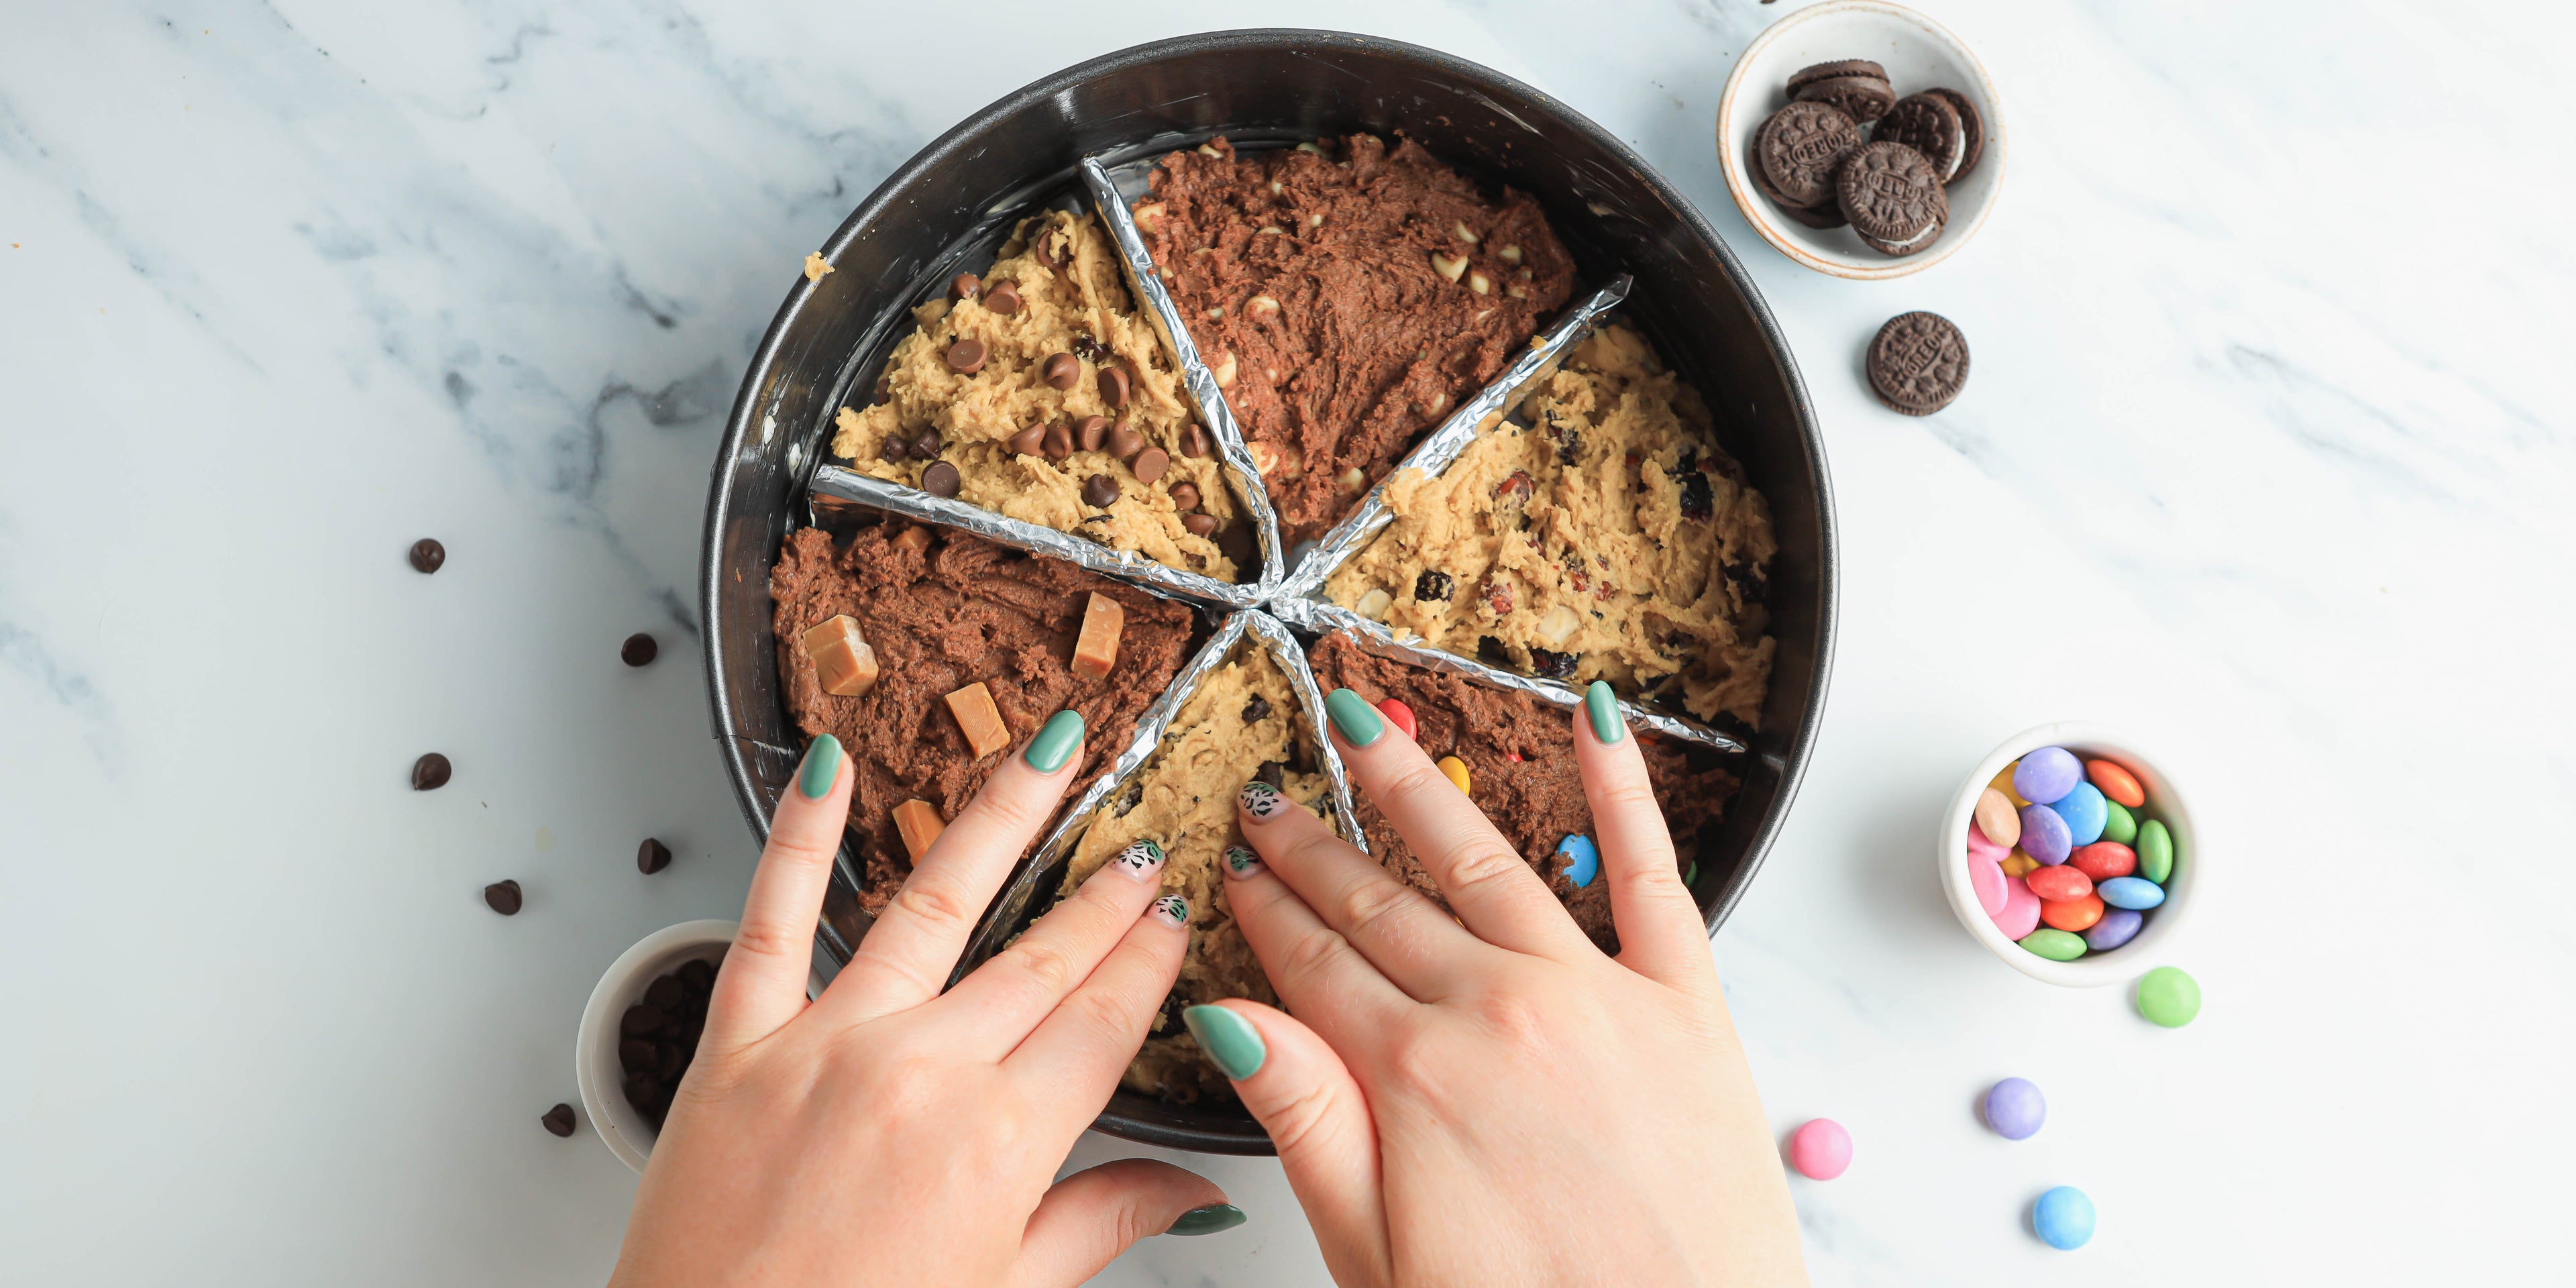 Two hands pushing down cookie dough mix into a circular cake tin with biscuits and sweets in background